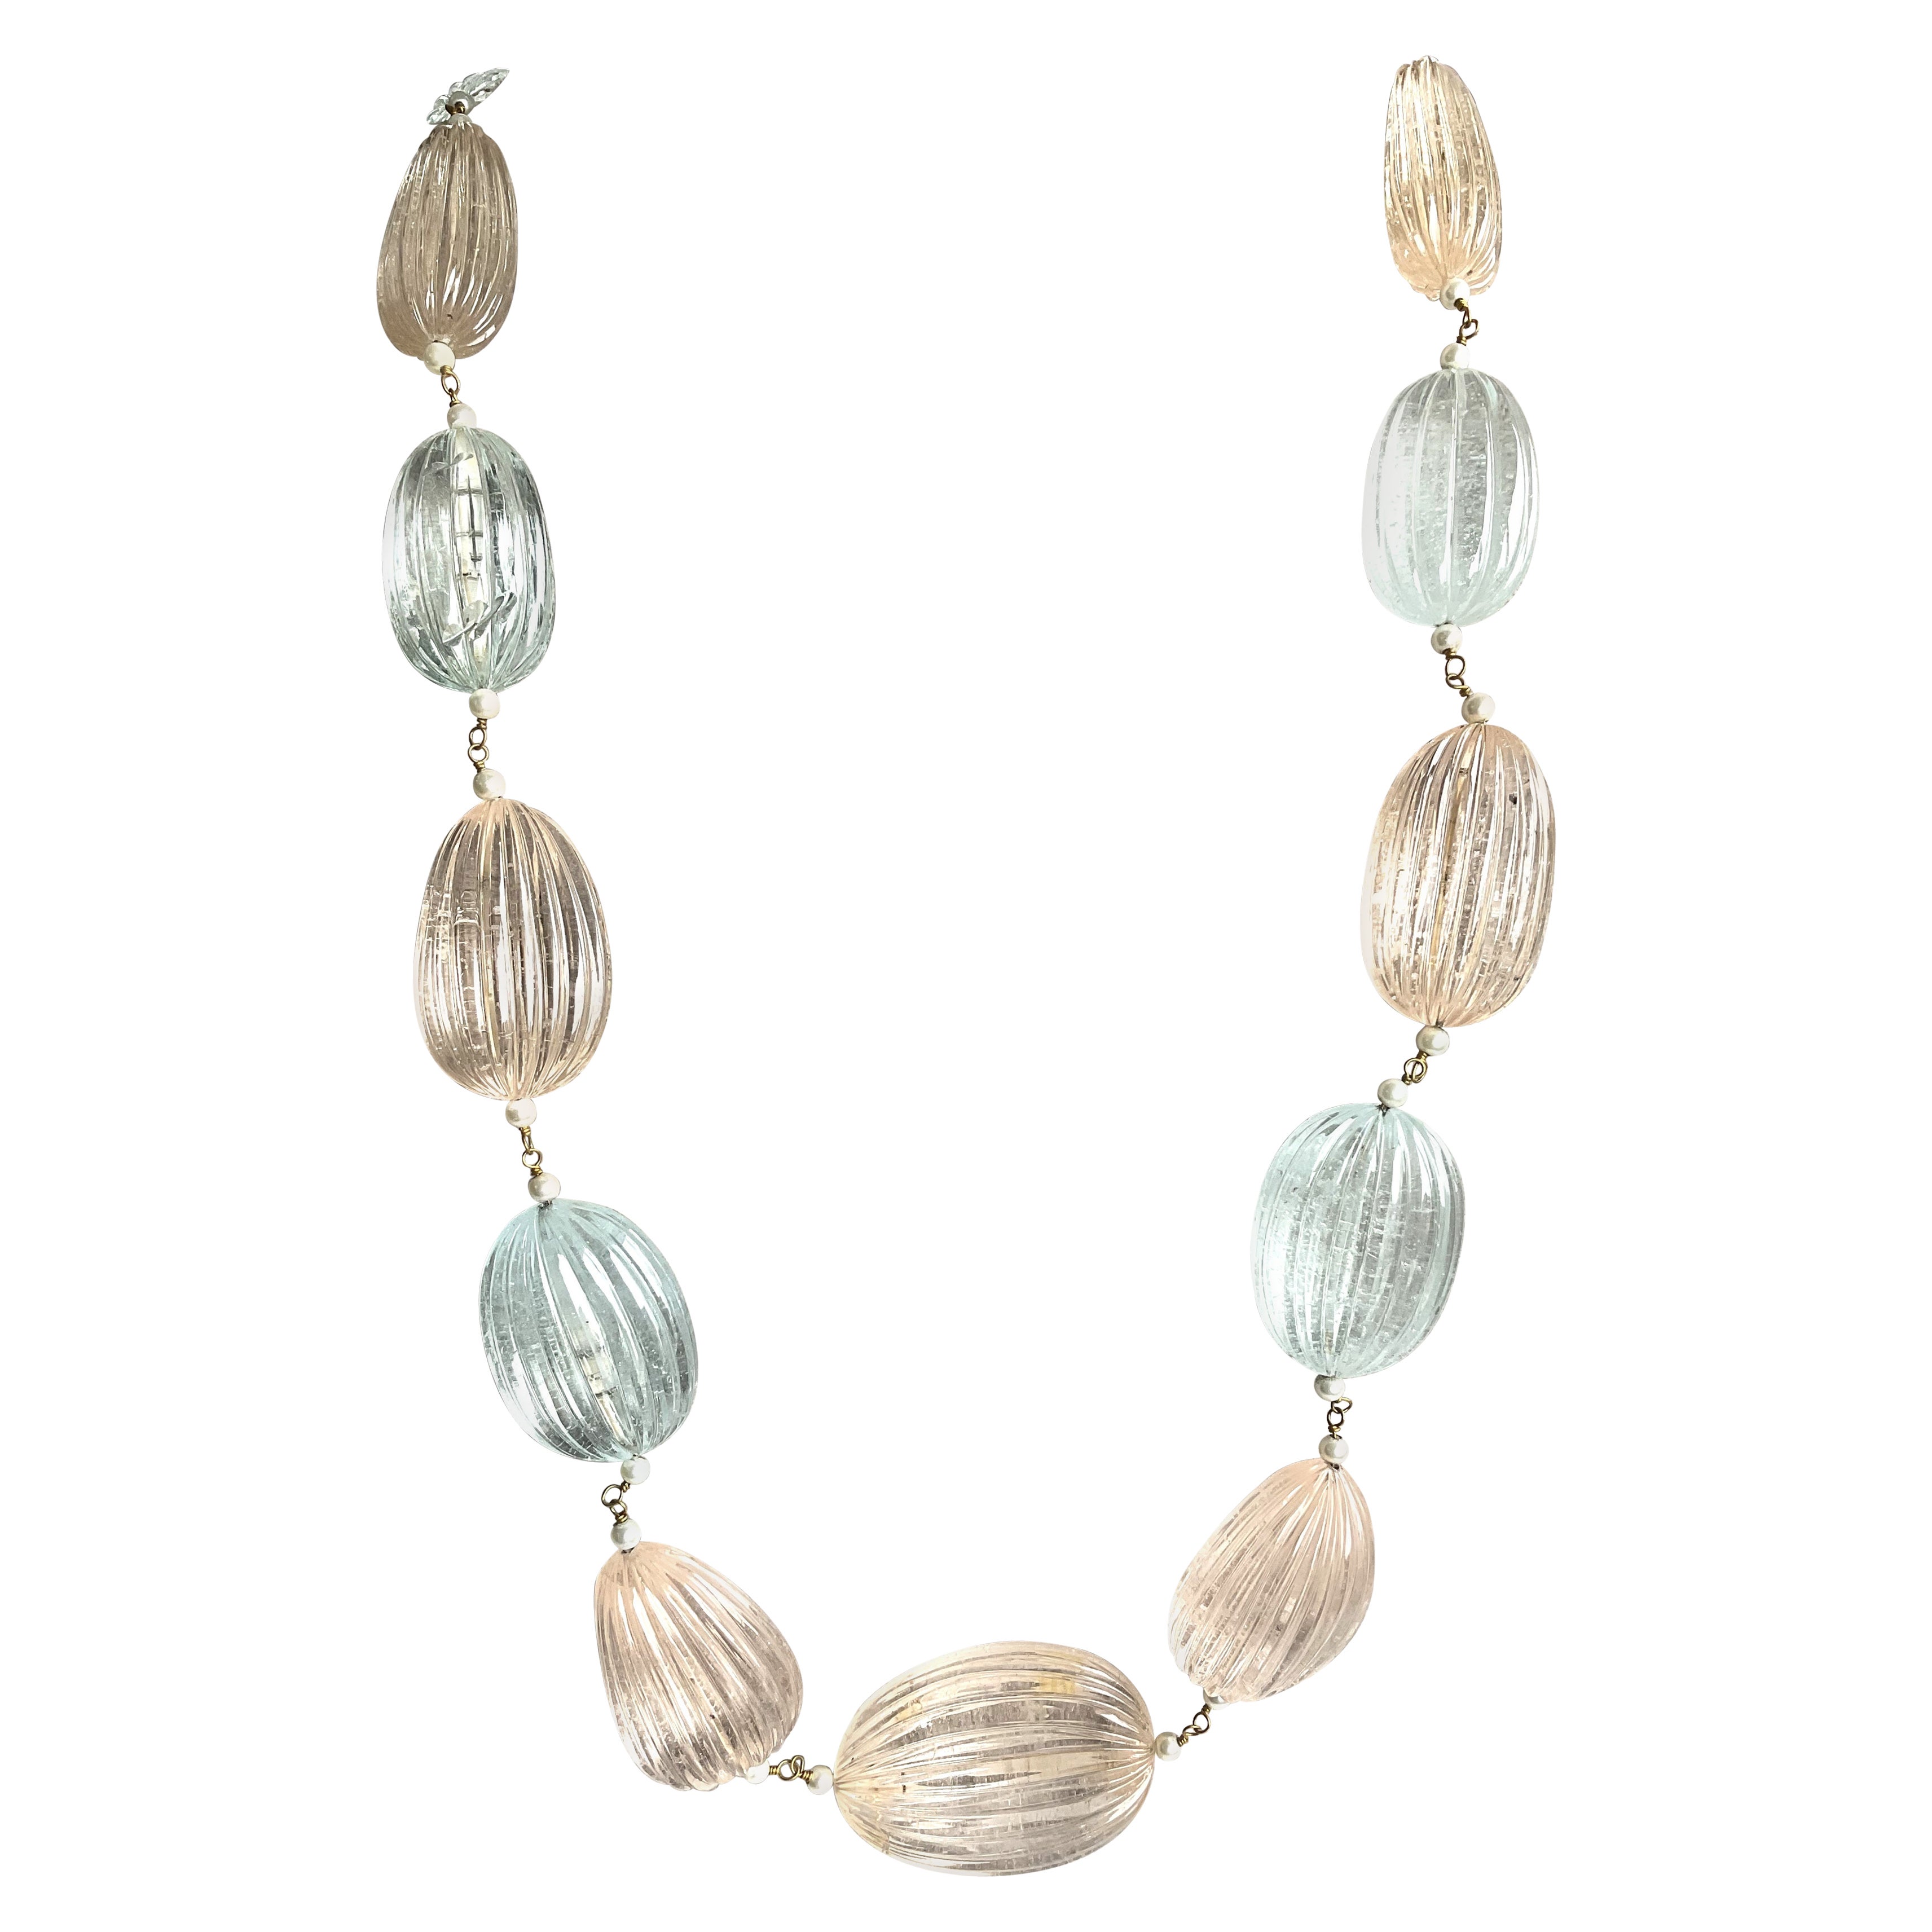 1501.35 carats Aquamarine Morganite Jewelry fluted Tumbled Necklace beryl Gems For Sale